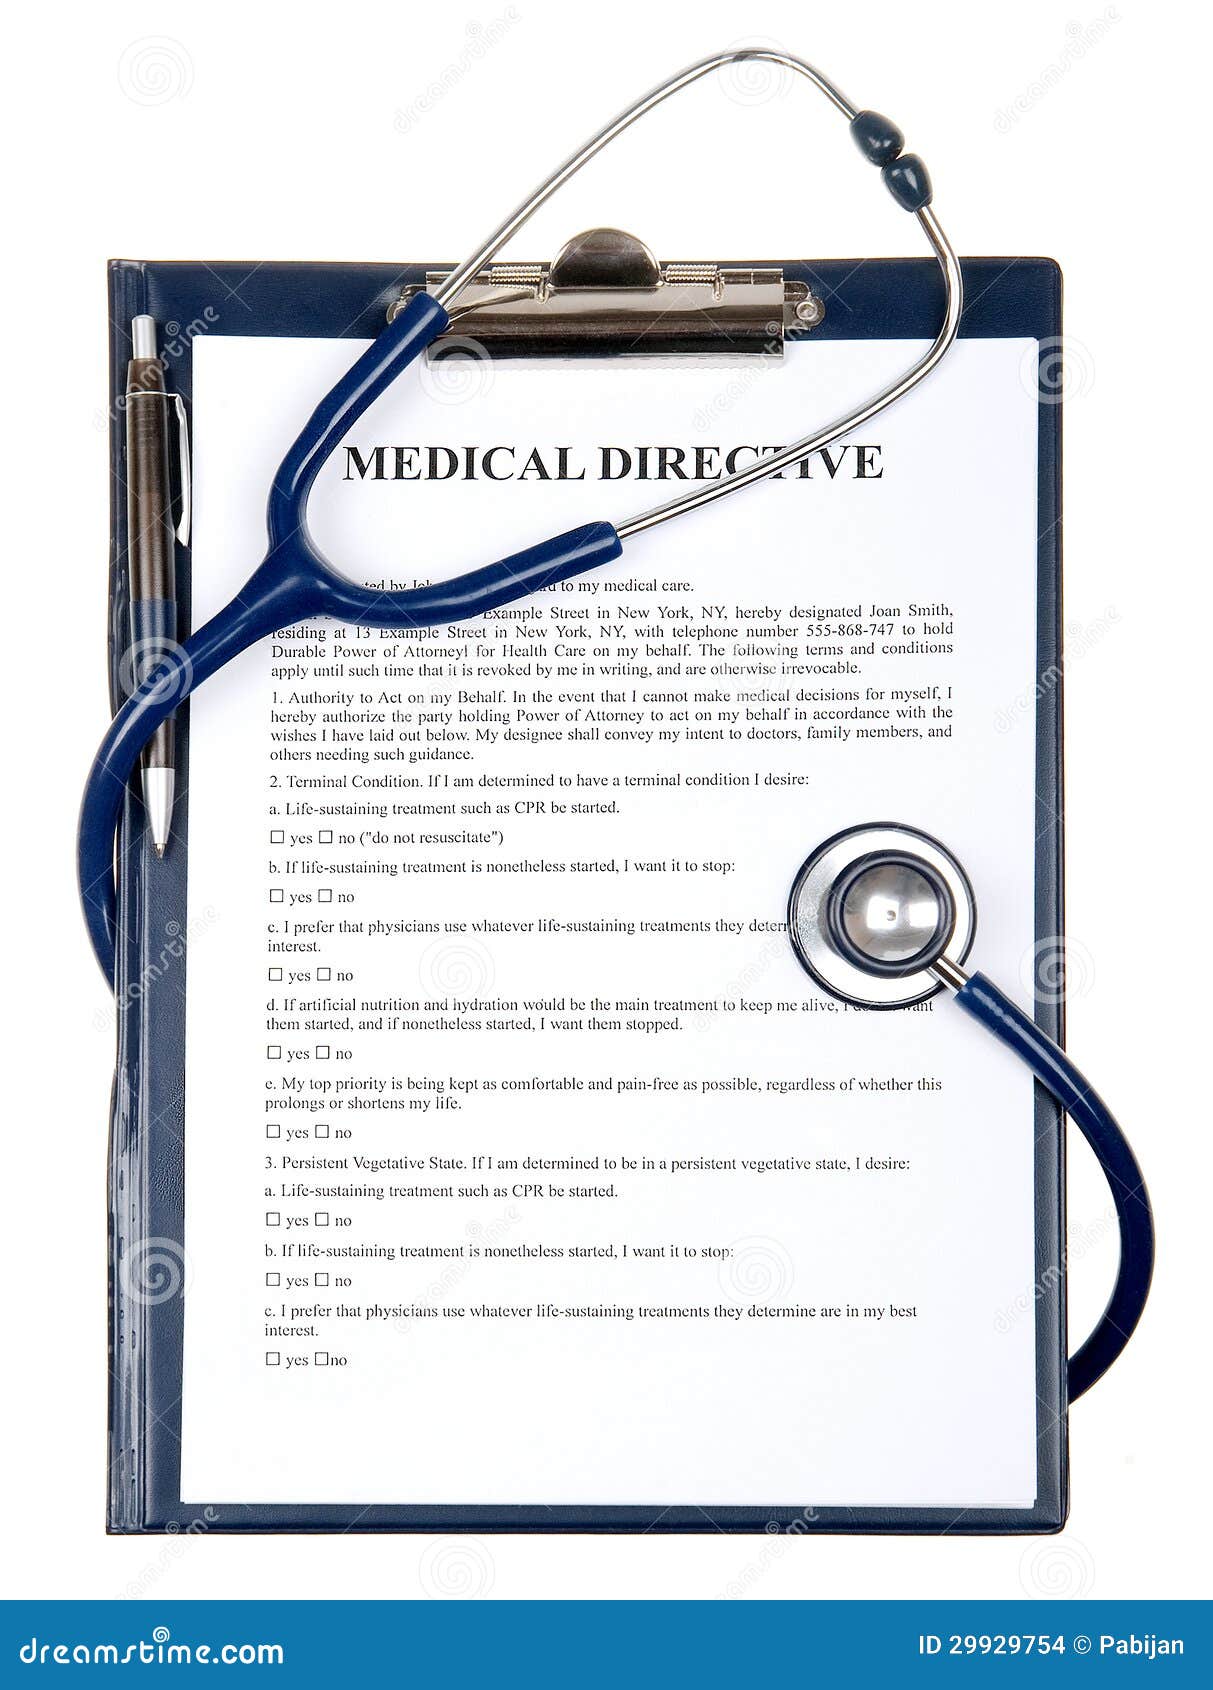 medical directive document with stethoscope